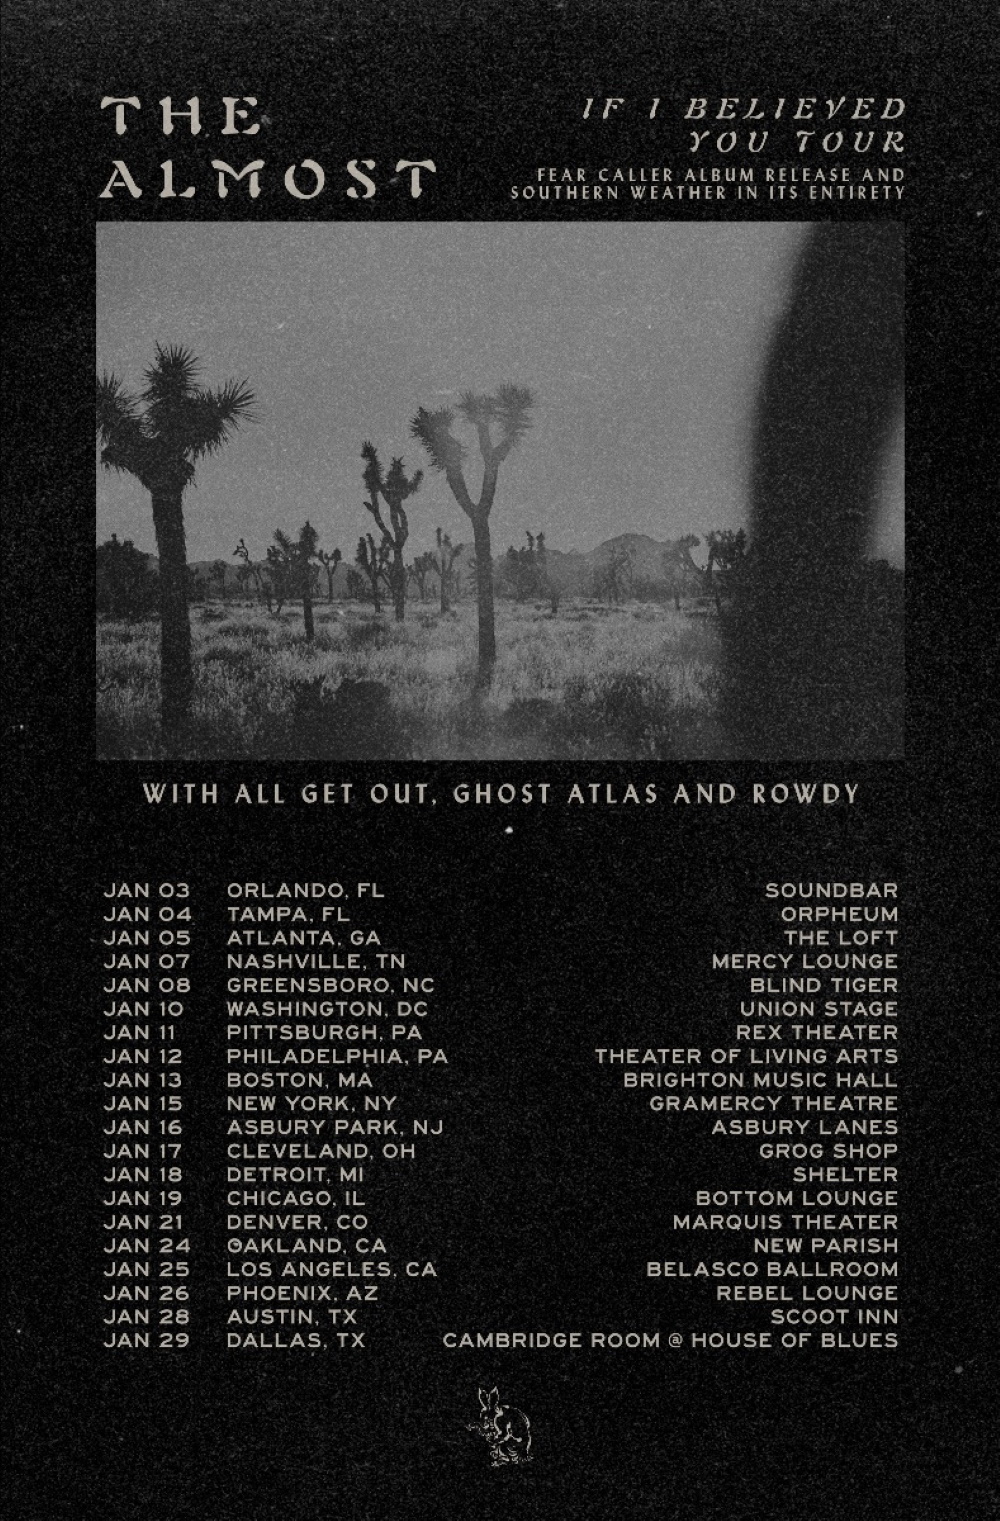 THE ALMOST tour